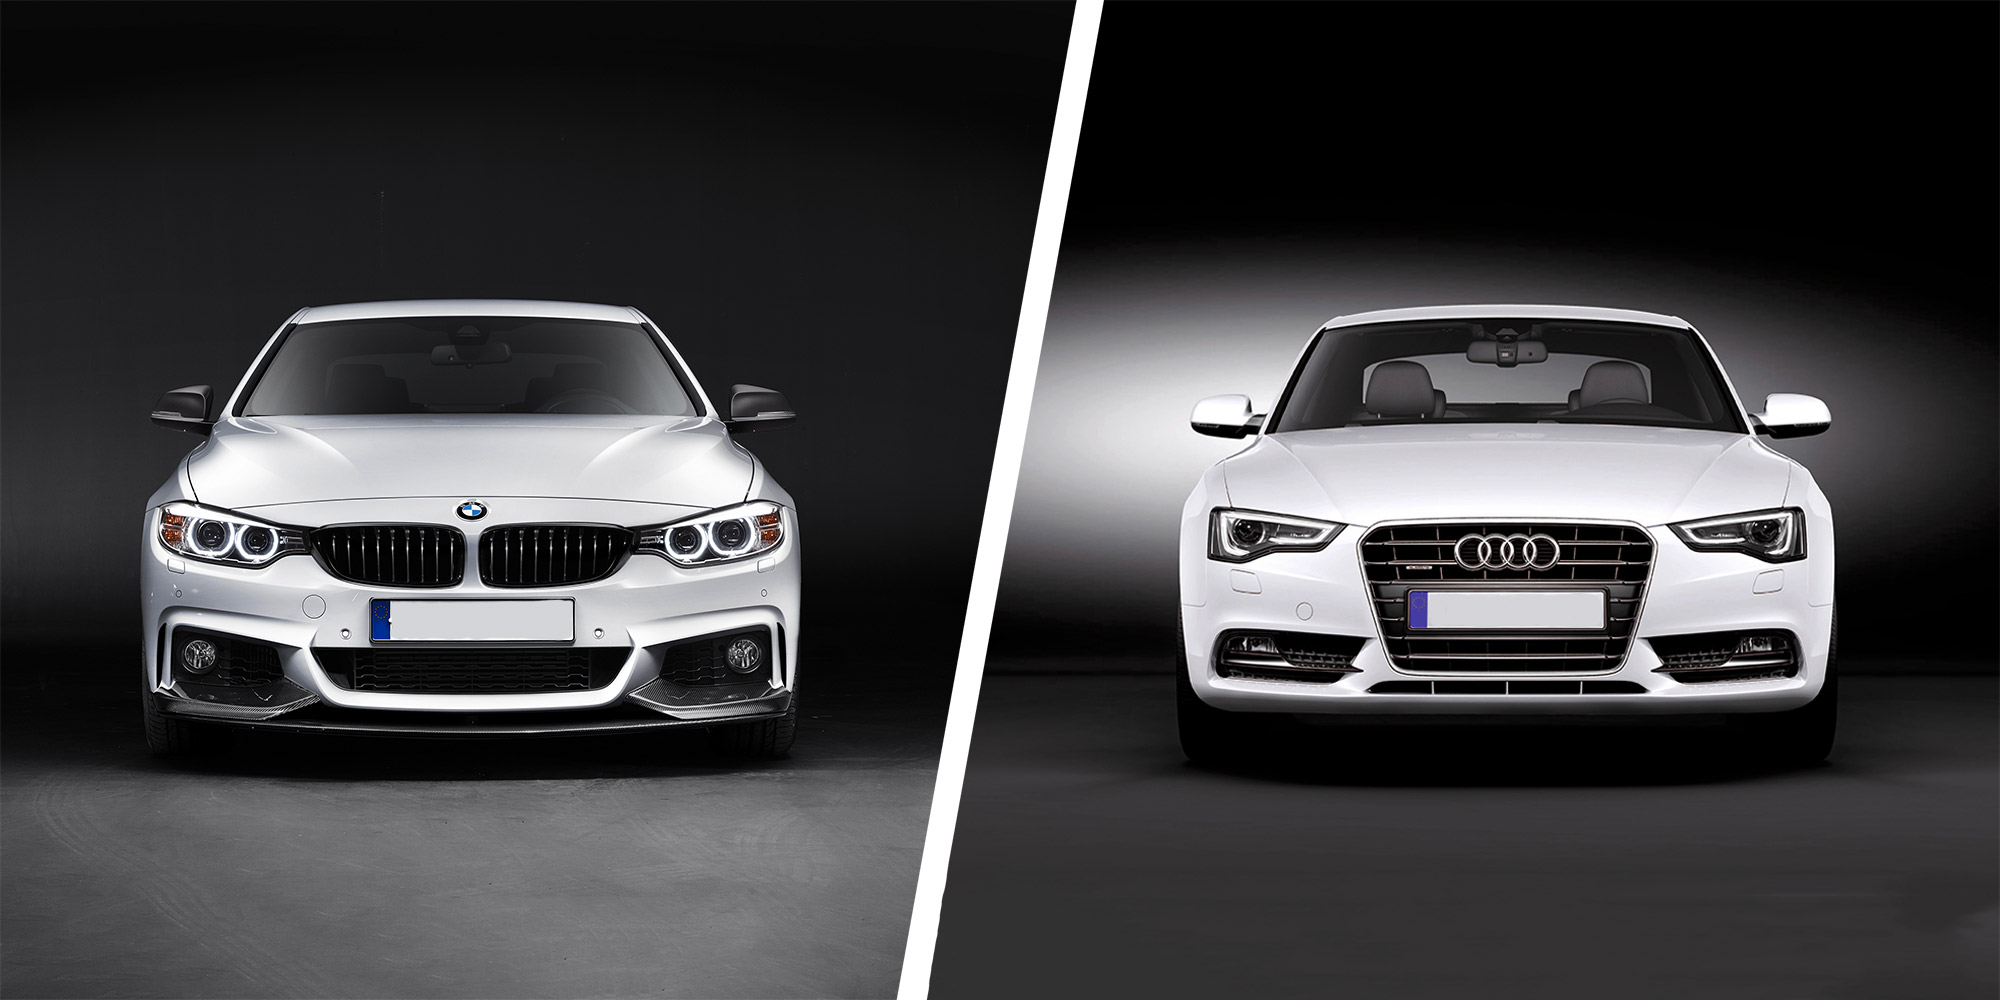 Are Audi better than BMW?